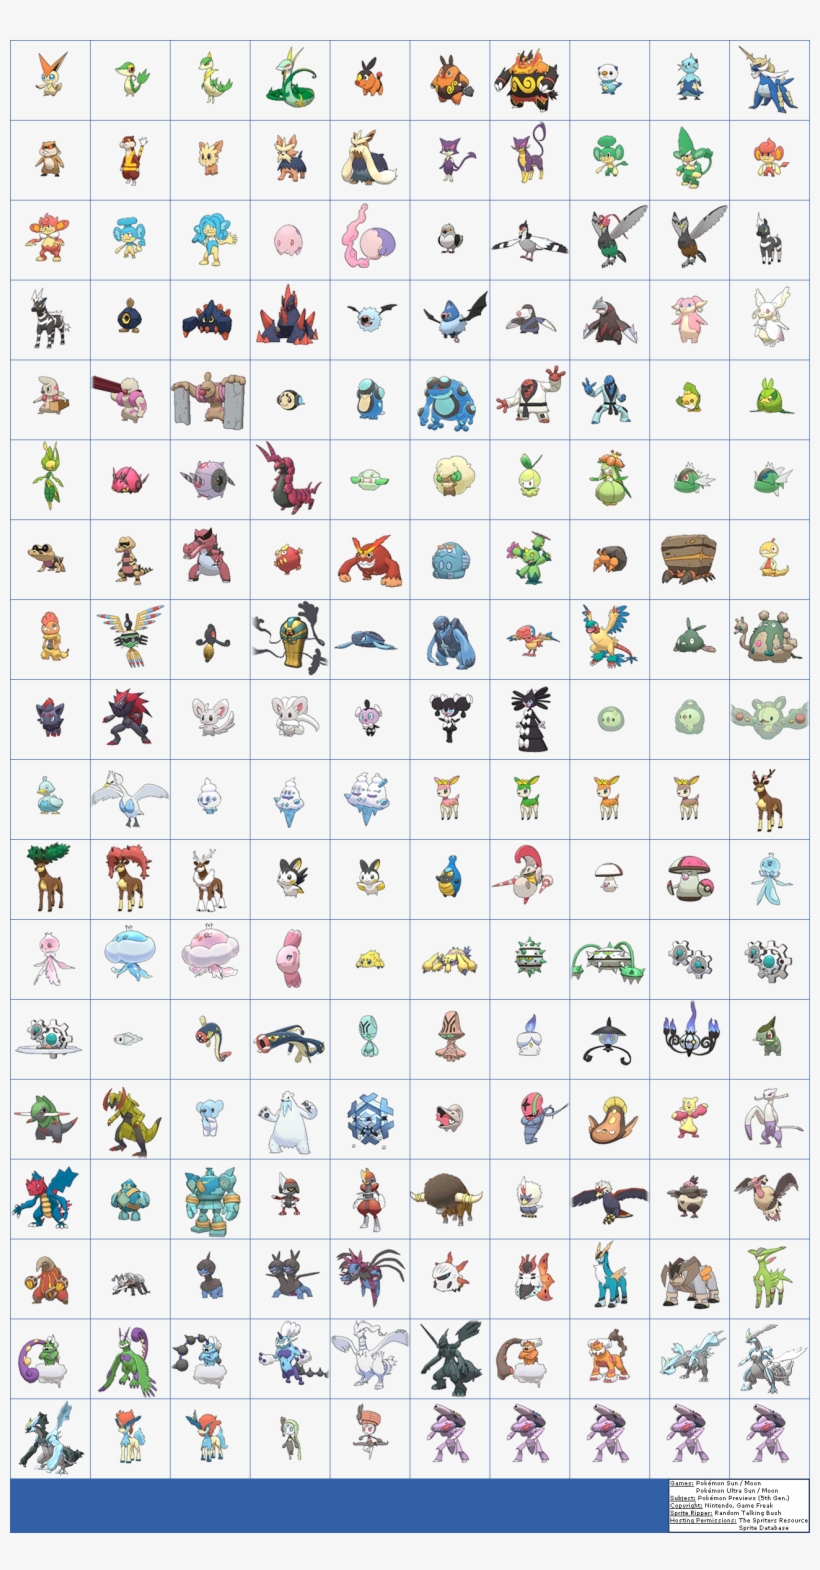 Click For Full Sized Image Pokémon Previews - Pokemon Sun And Moon Sprites, transparent png #5989242